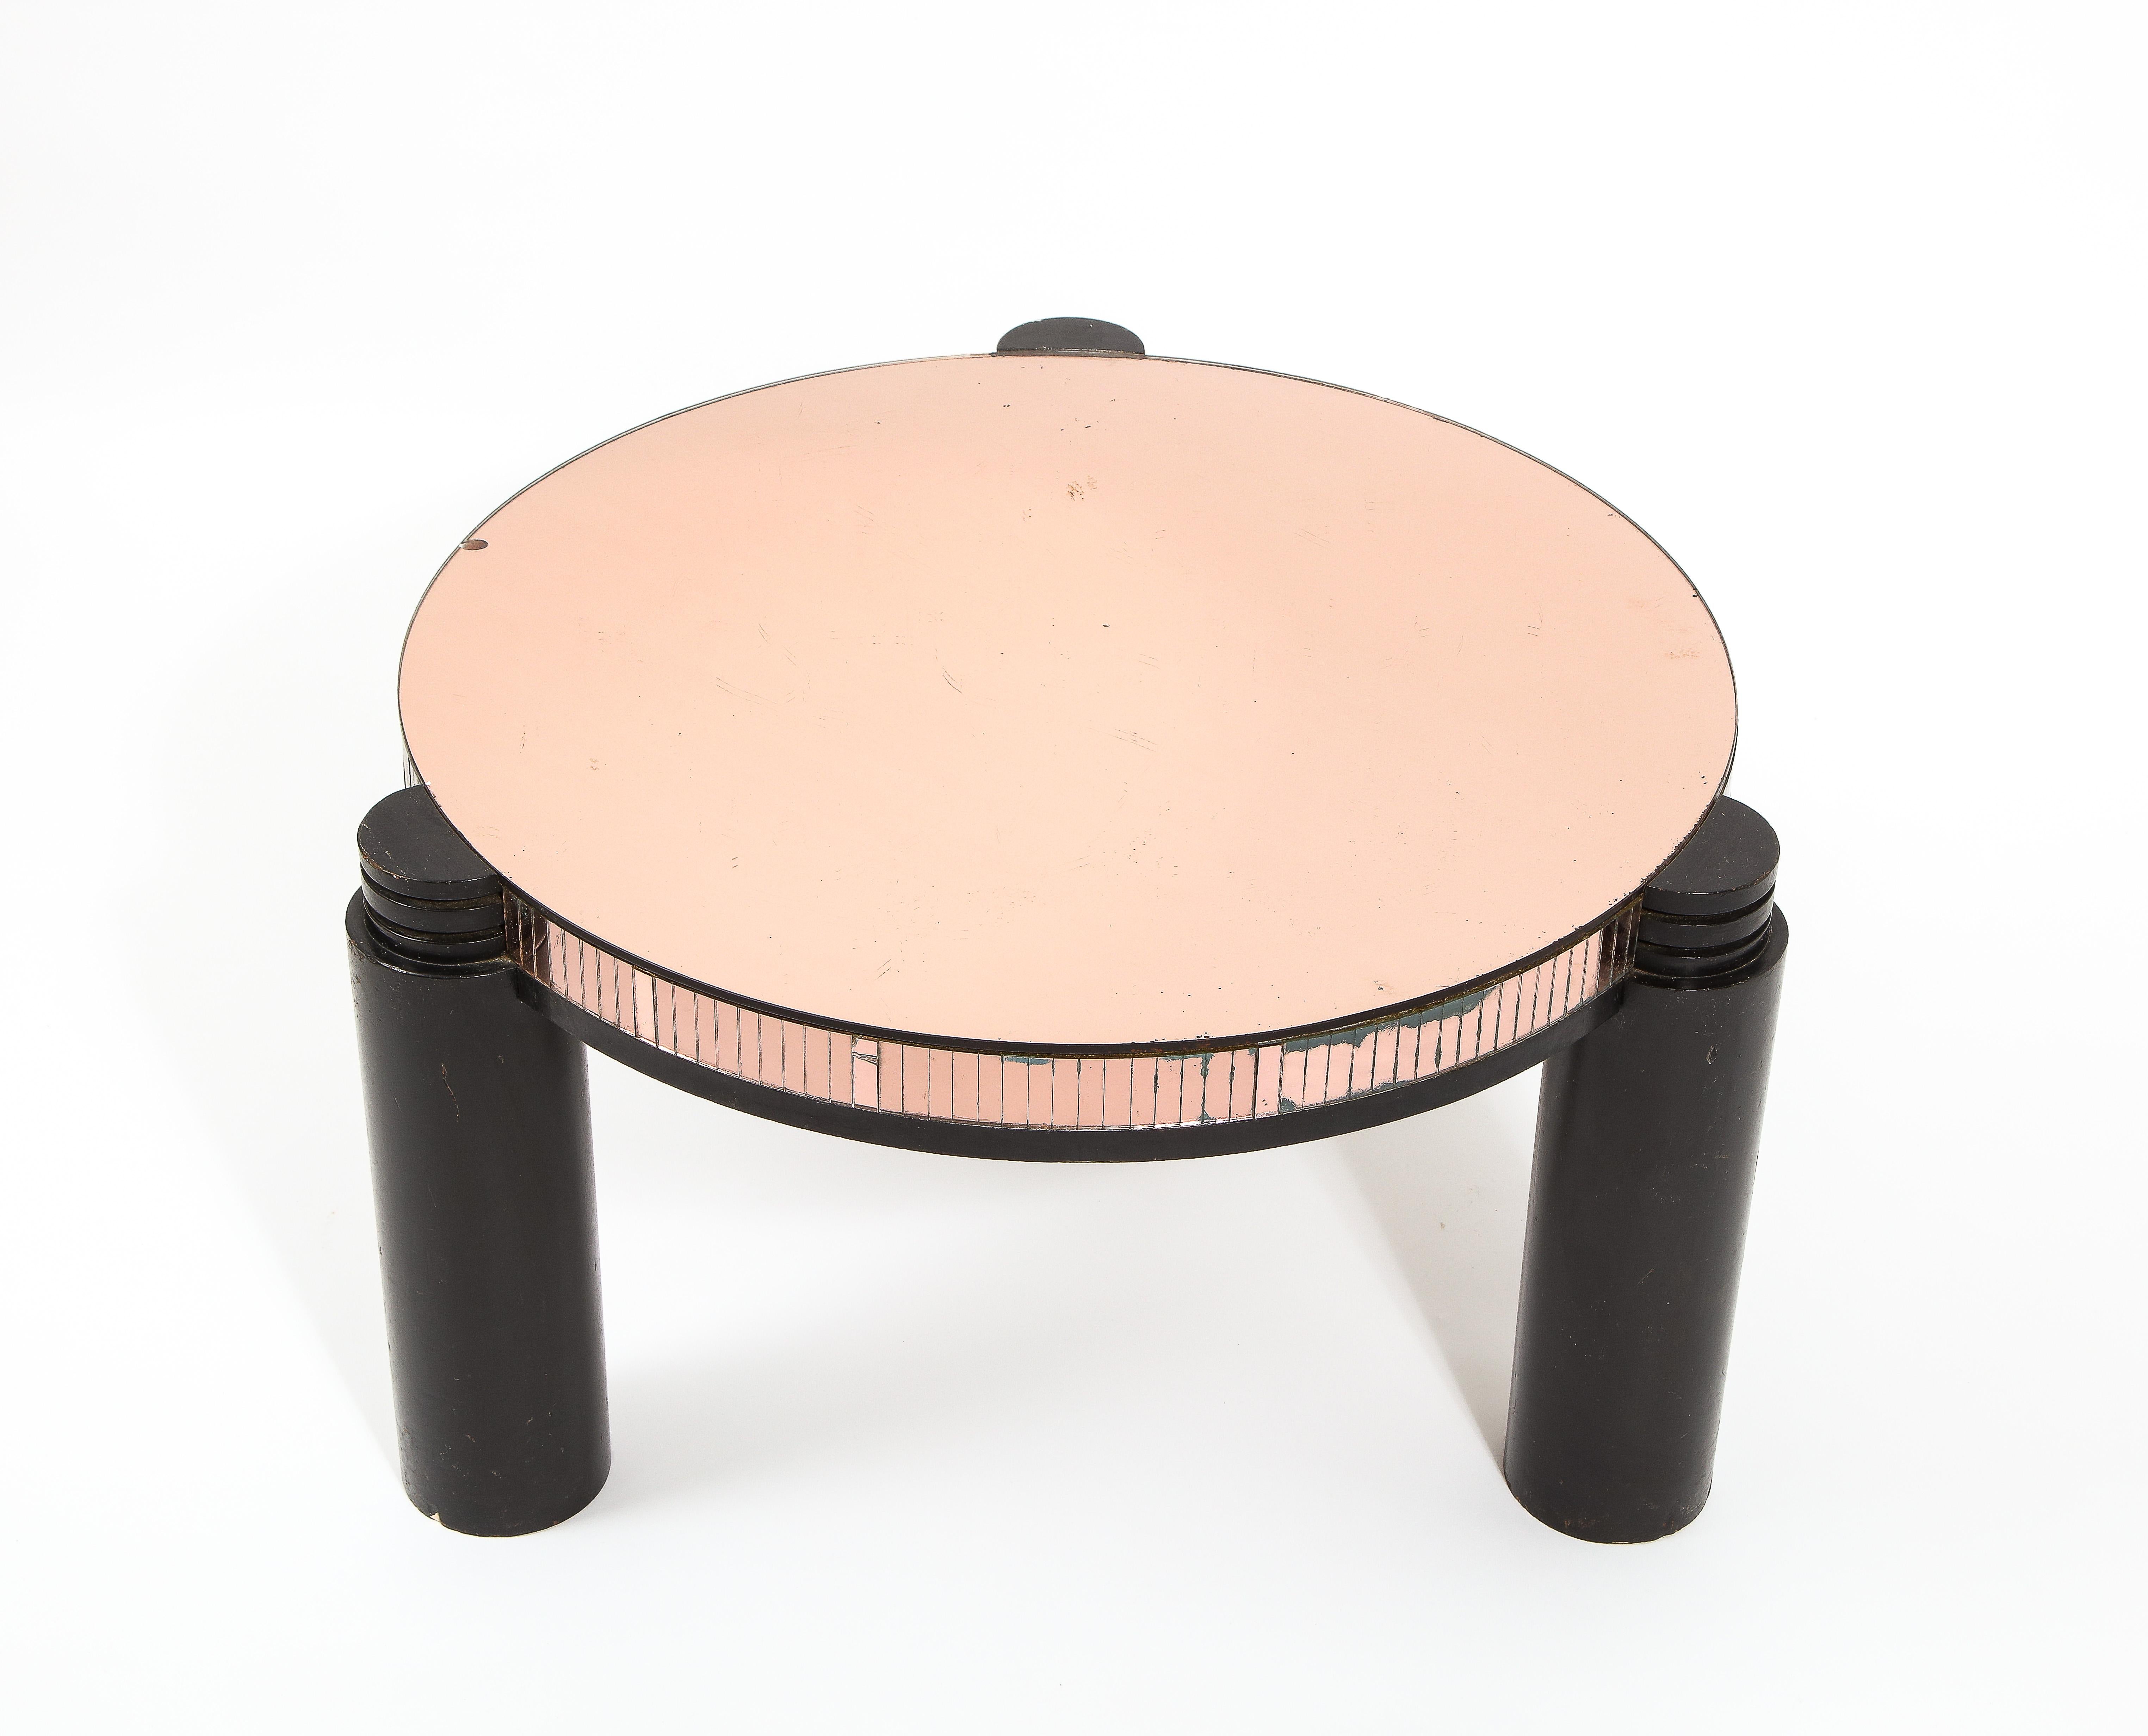 Black Ebonized & Pink Mirror Round Deco Style Cocktail Table, France 1940's For Sale 2